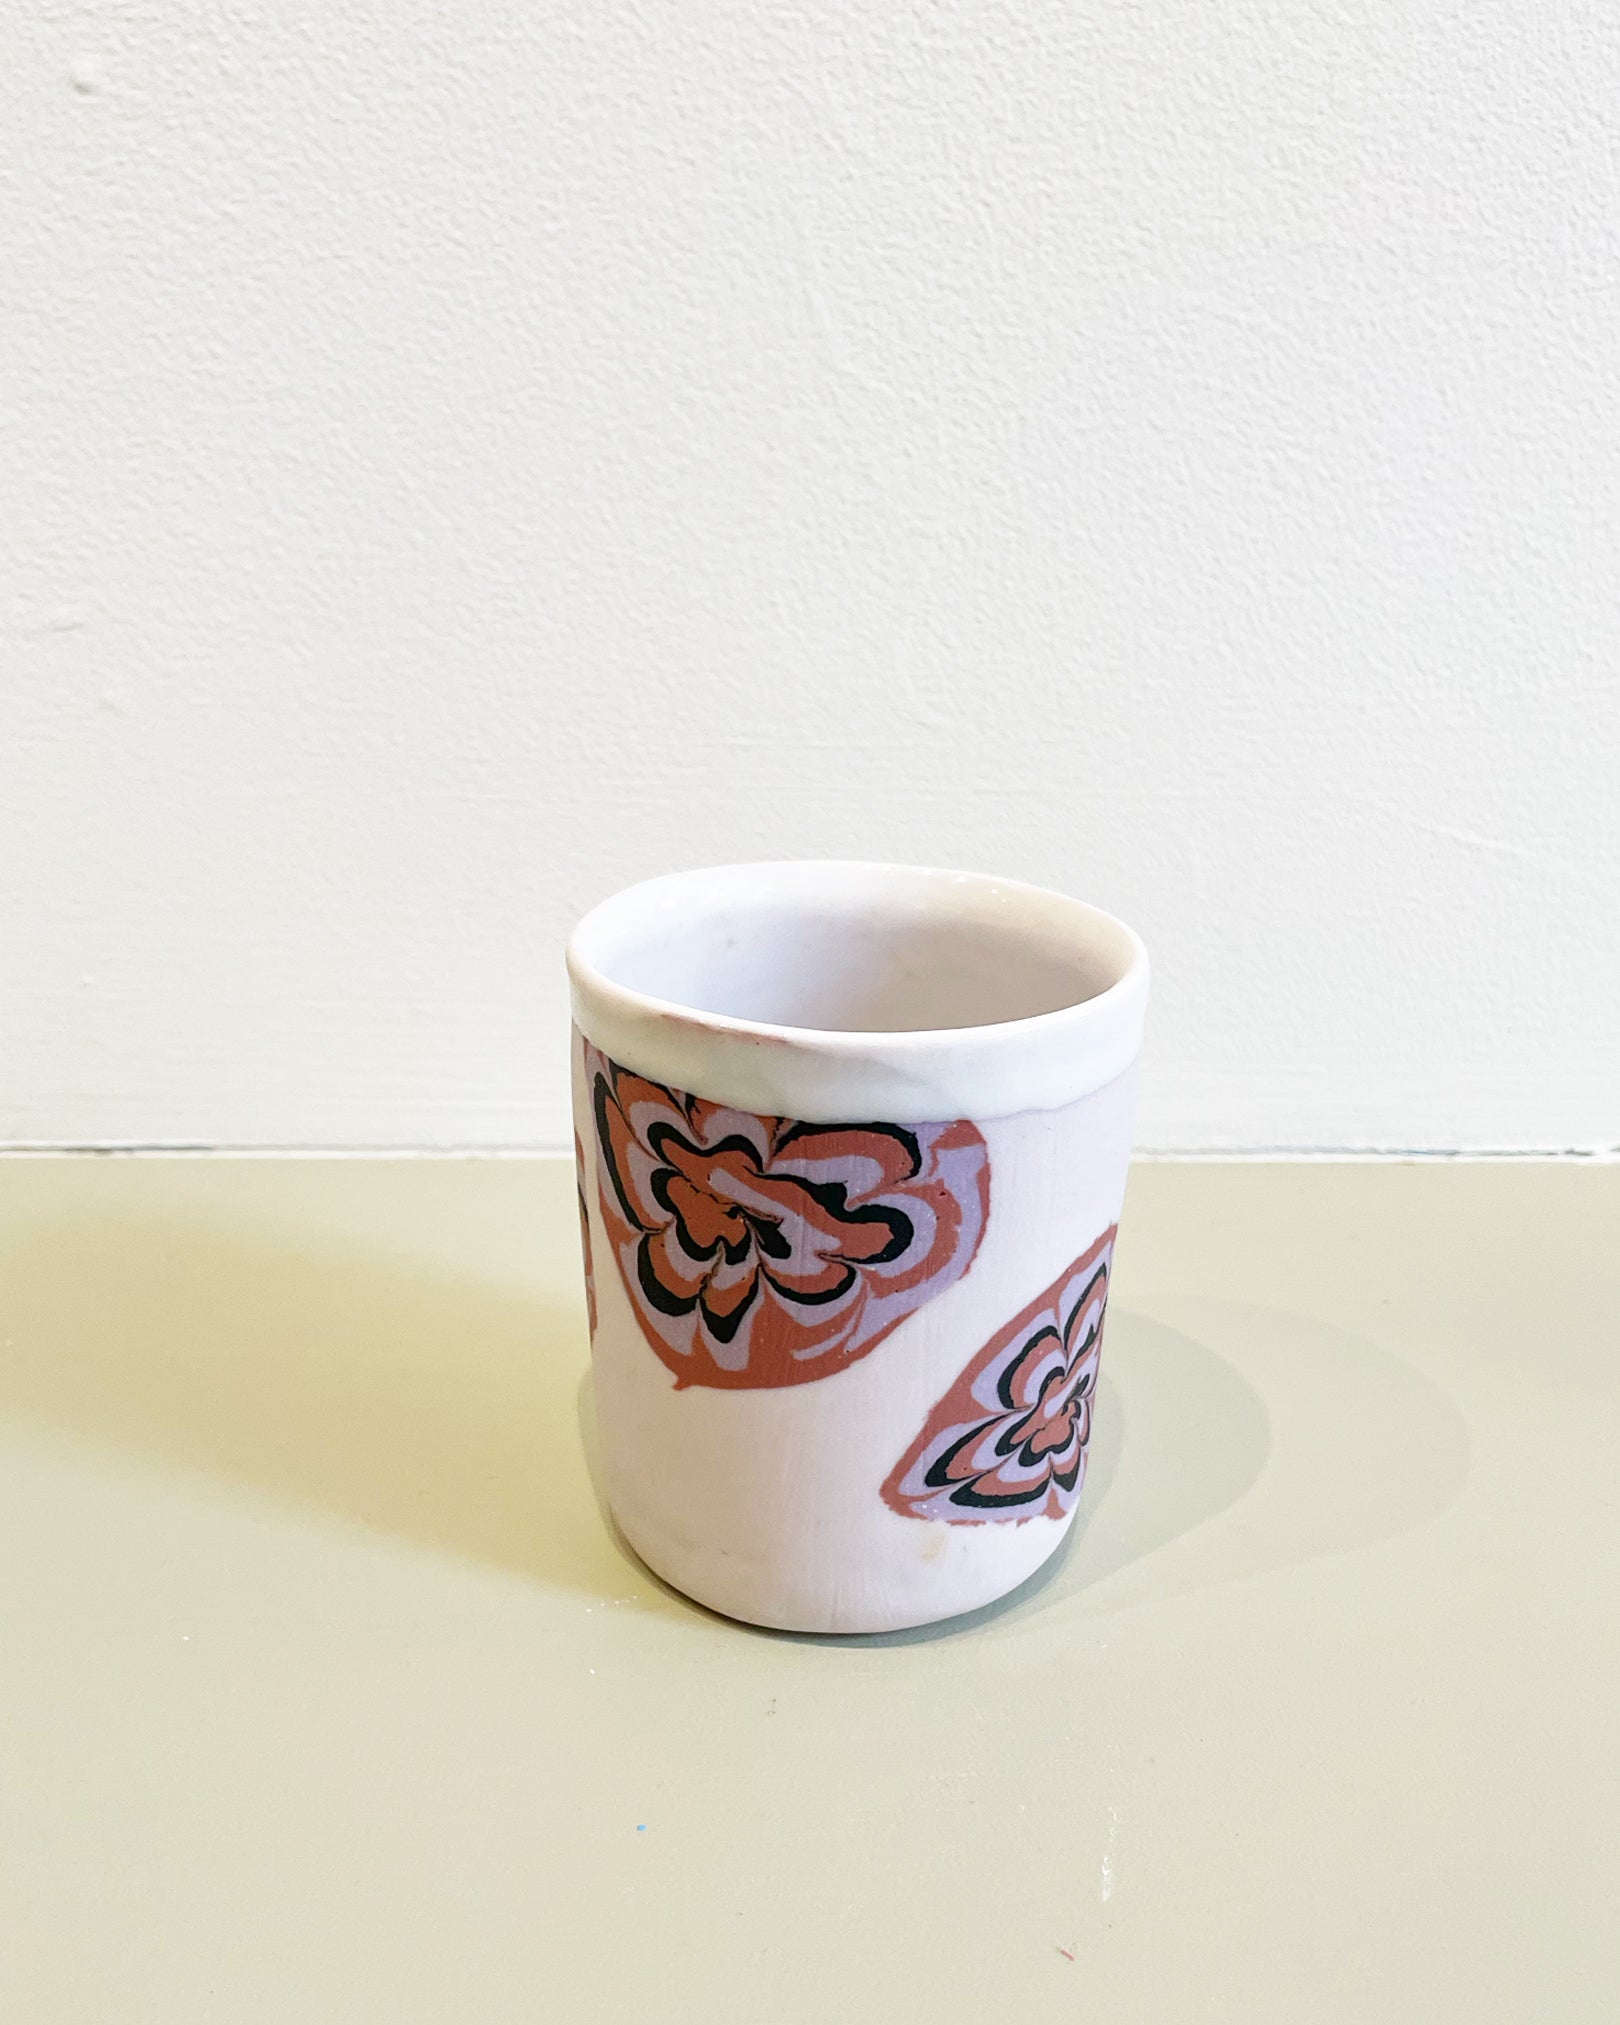 CERAMICISM Graphic Carnation Tumbler in Lilac available at Lahn.shop